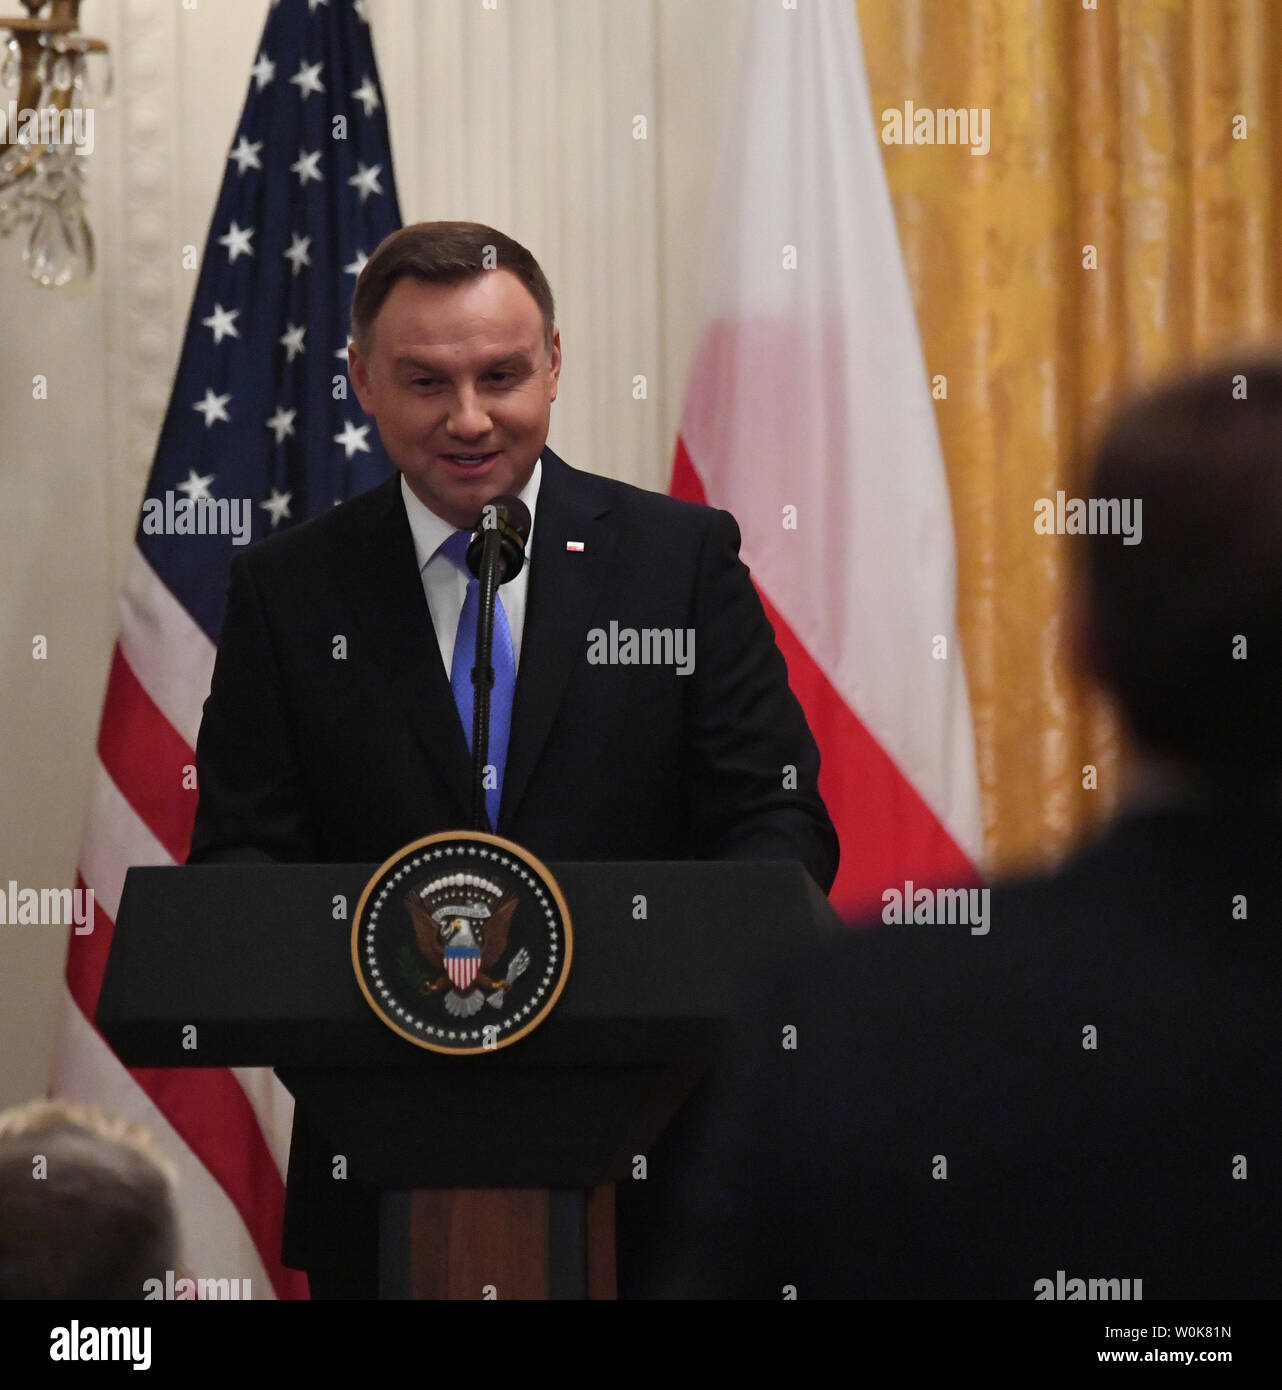 Polish President Andrzej Duda speaks during a joint press conference with President Donald Trump in the White House in Washington, DC on September 18, 2018.         Photo by Pat Benic/UPI Stock Photo